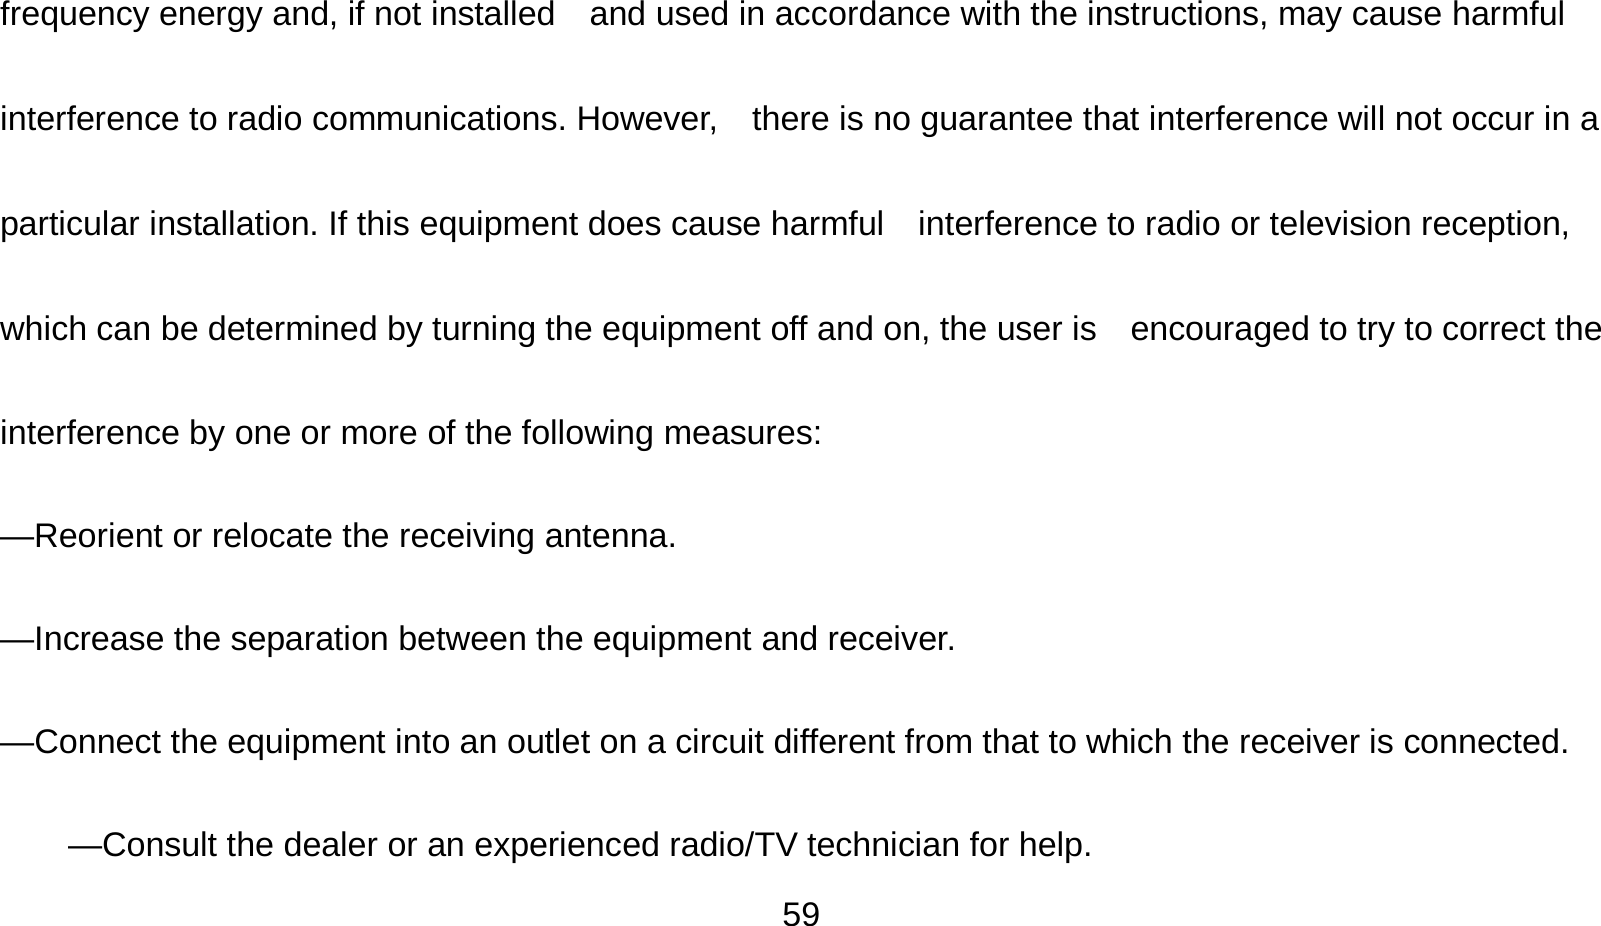   59frequency energy and, if not installed    and used in accordance with the instructions, may cause harmful interference to radio communications. However,    there is no guarantee that interference will not occur in a particular installation. If this equipment does cause harmful    interference to radio or television reception, which can be determined by turning the equipment off and on, the user is    encouraged to try to correct the interference by one or more of the following measures:      —Reorient or relocate the receiving antenna.      —Increase the separation between the equipment and receiver.      —Connect the equipment into an outlet on a circuit different from that to which the receiver is connected.      —Consult the dealer or an experienced radio/TV technician for help. 